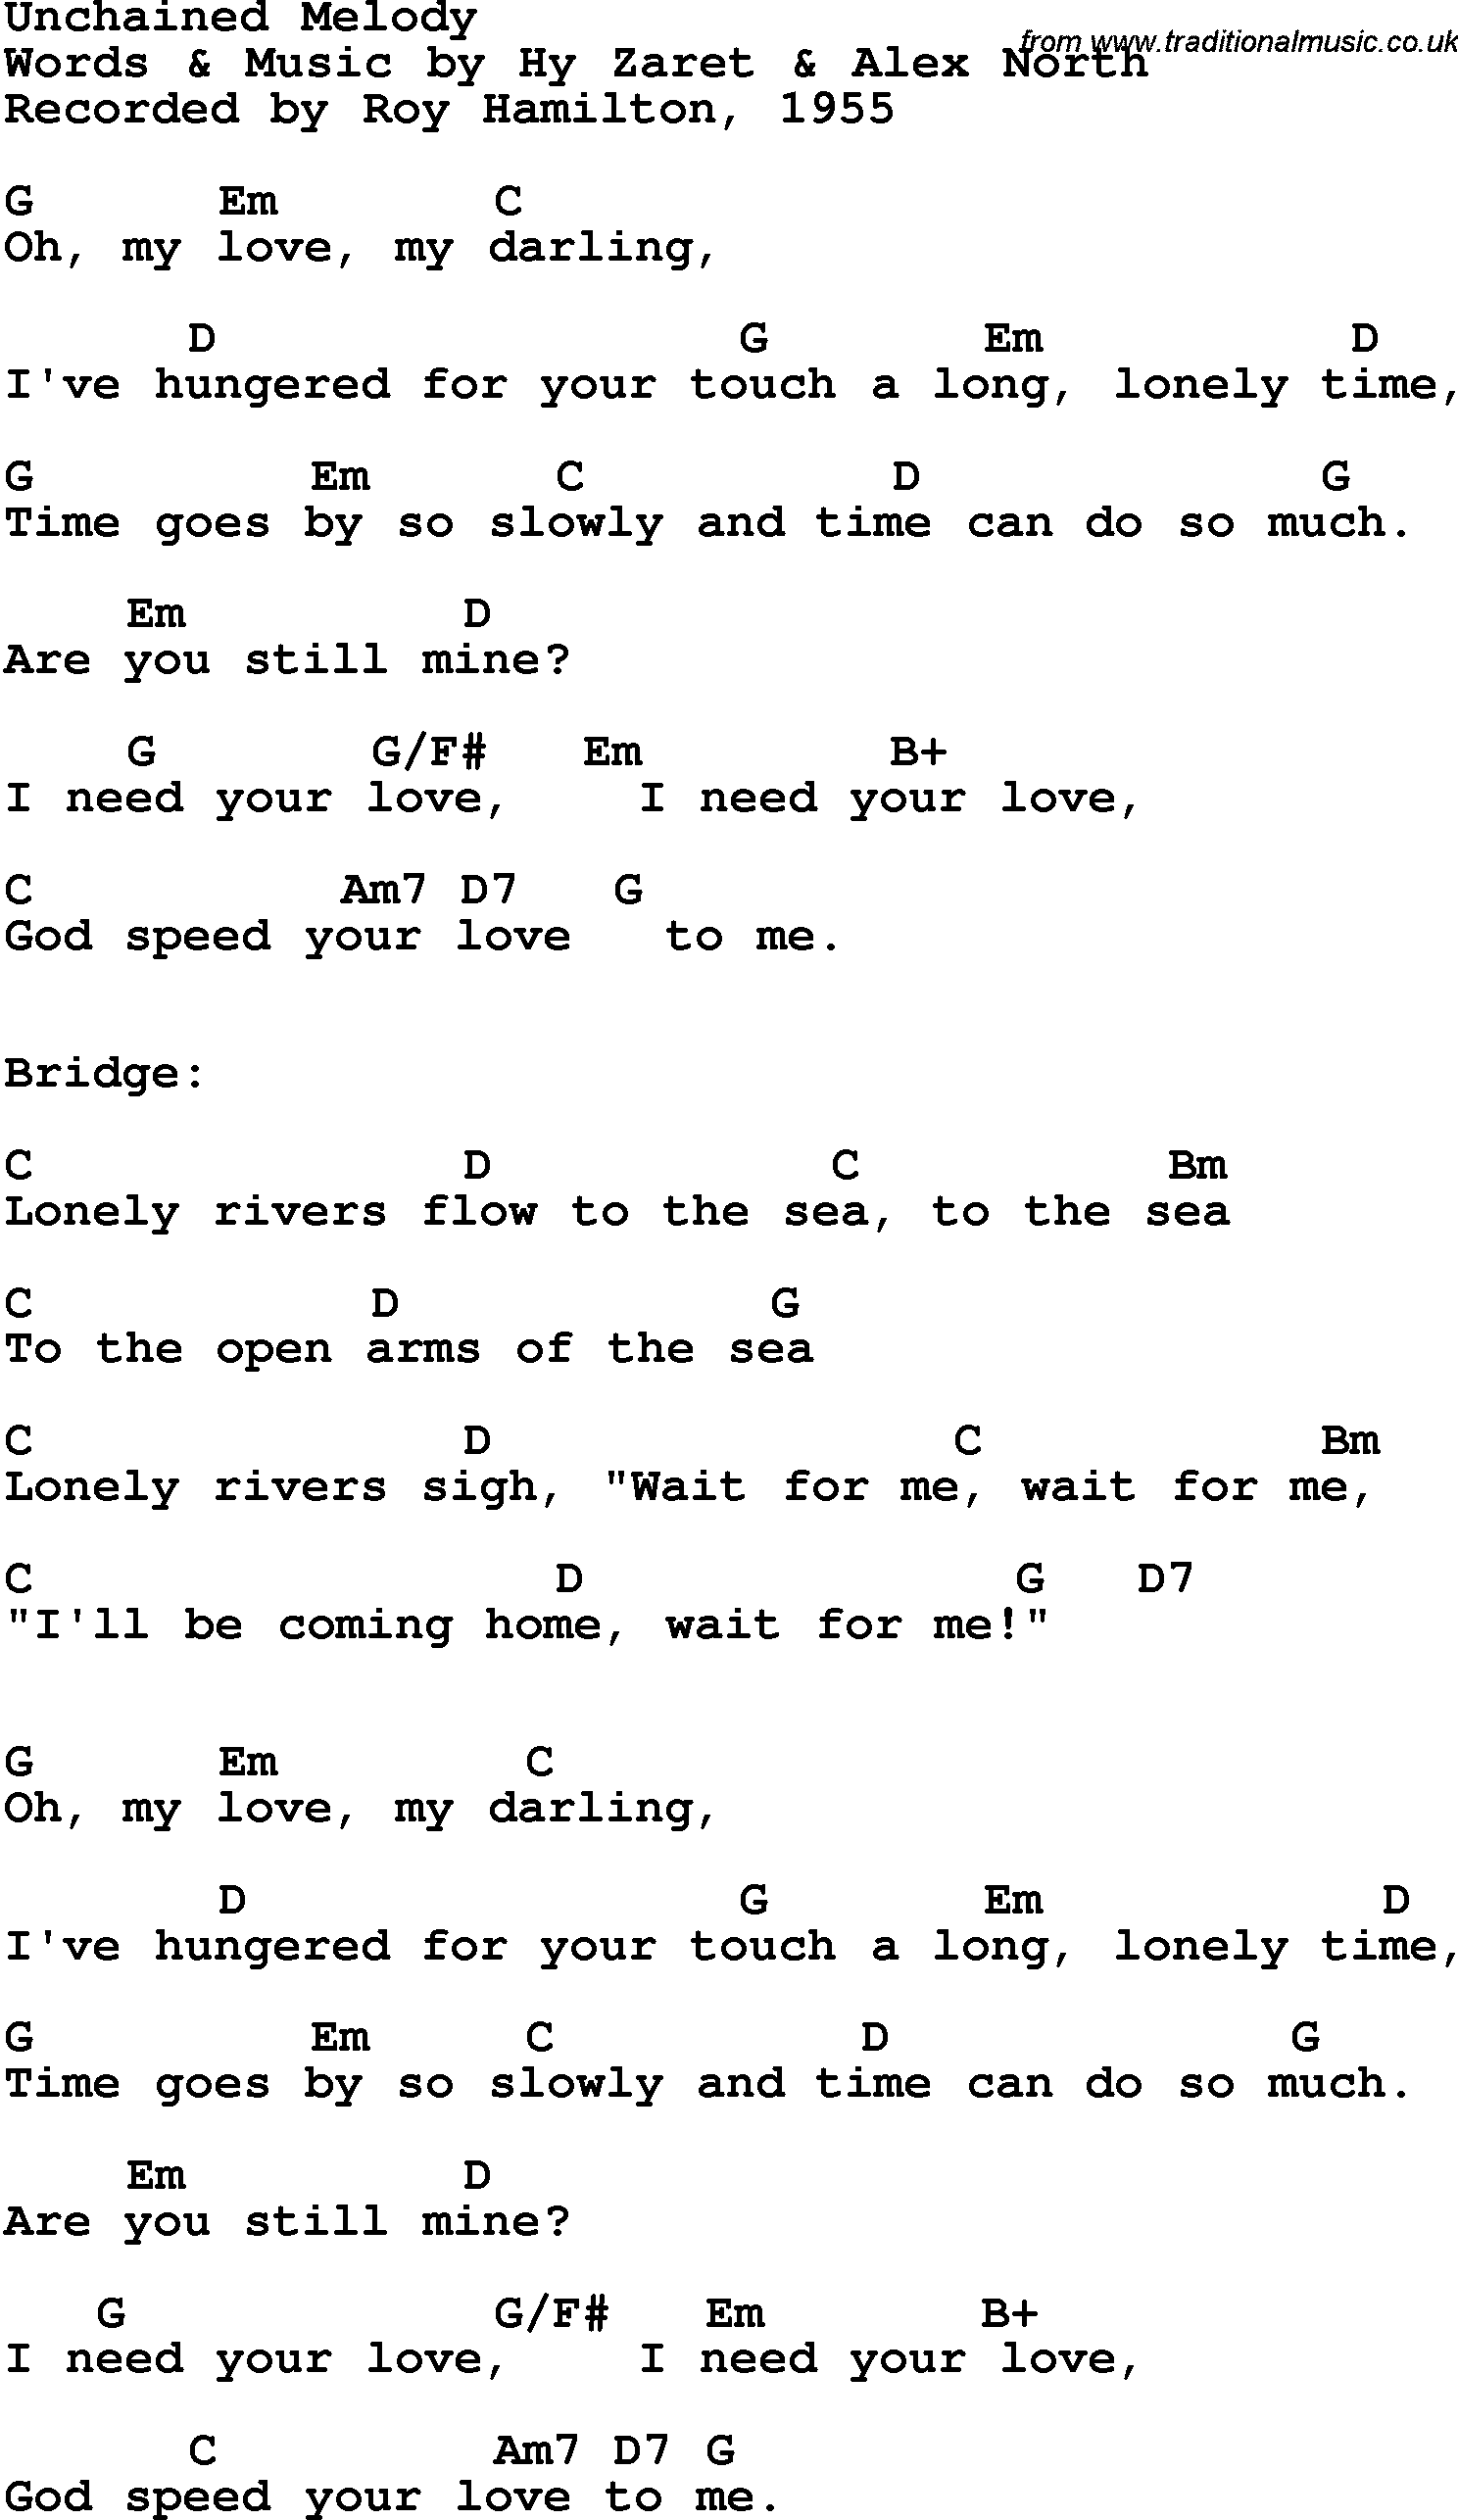 Song Lyrics with guitar chords for Unchained Melody - Roy Hamilton, 1955